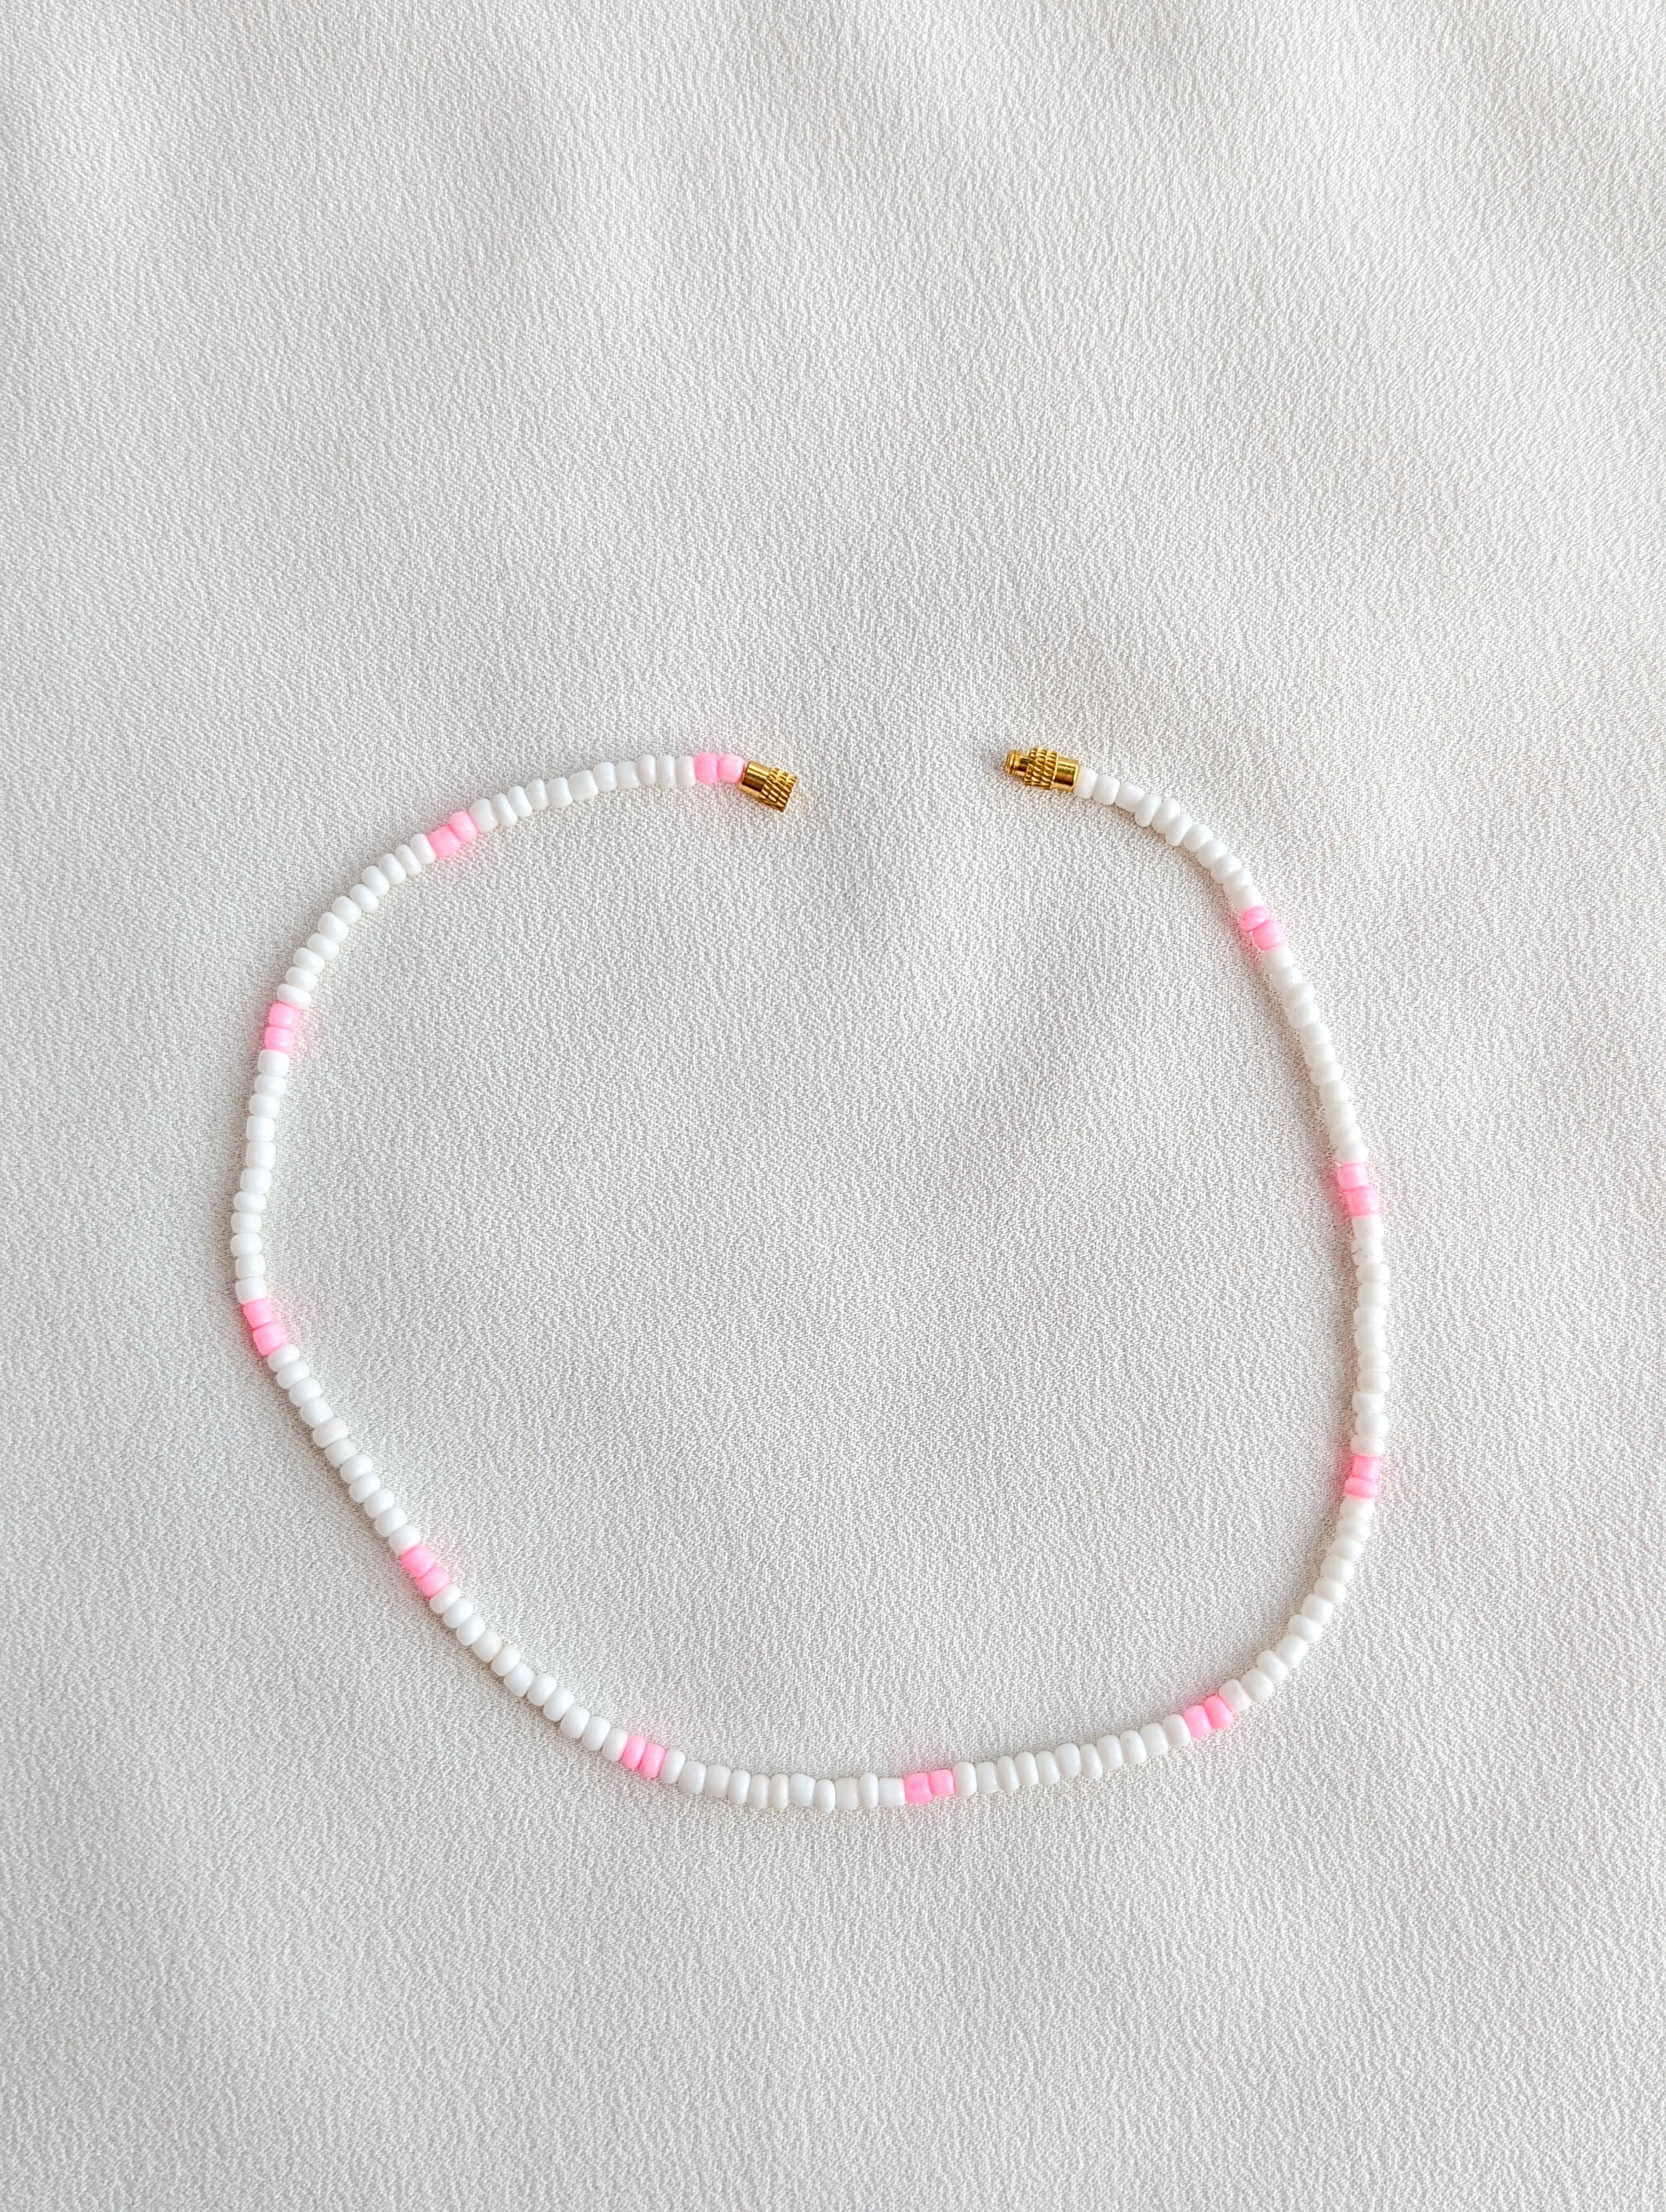 [THE ELEVEN] Necklace: White/Pink [Small Beads]